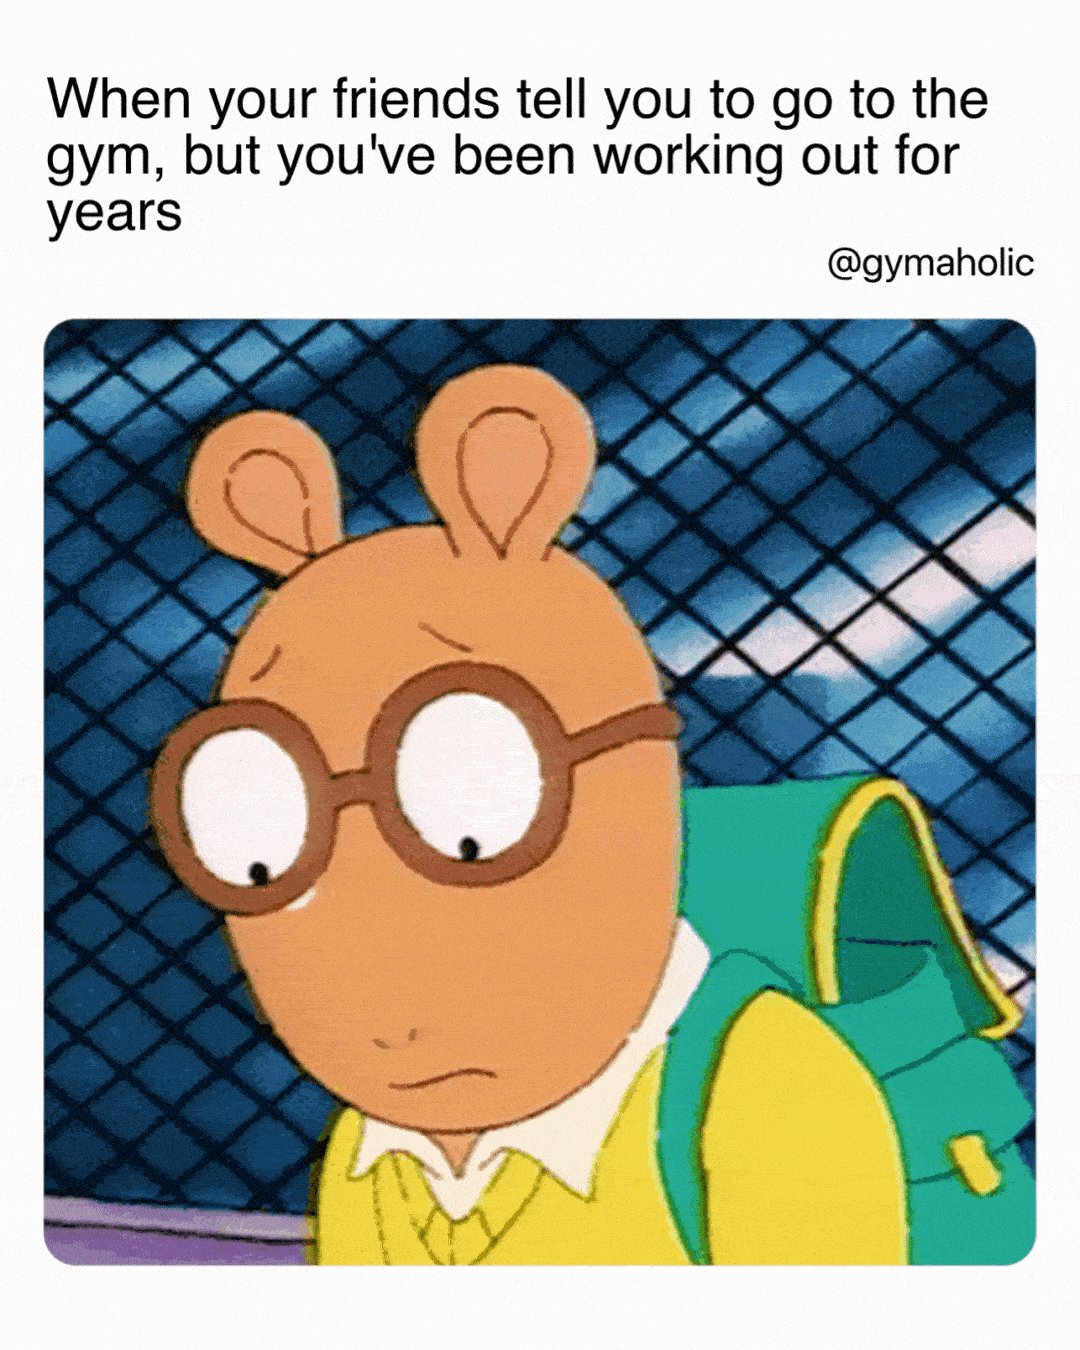 When your friends tell you to go to the gym but you’ve been working out for